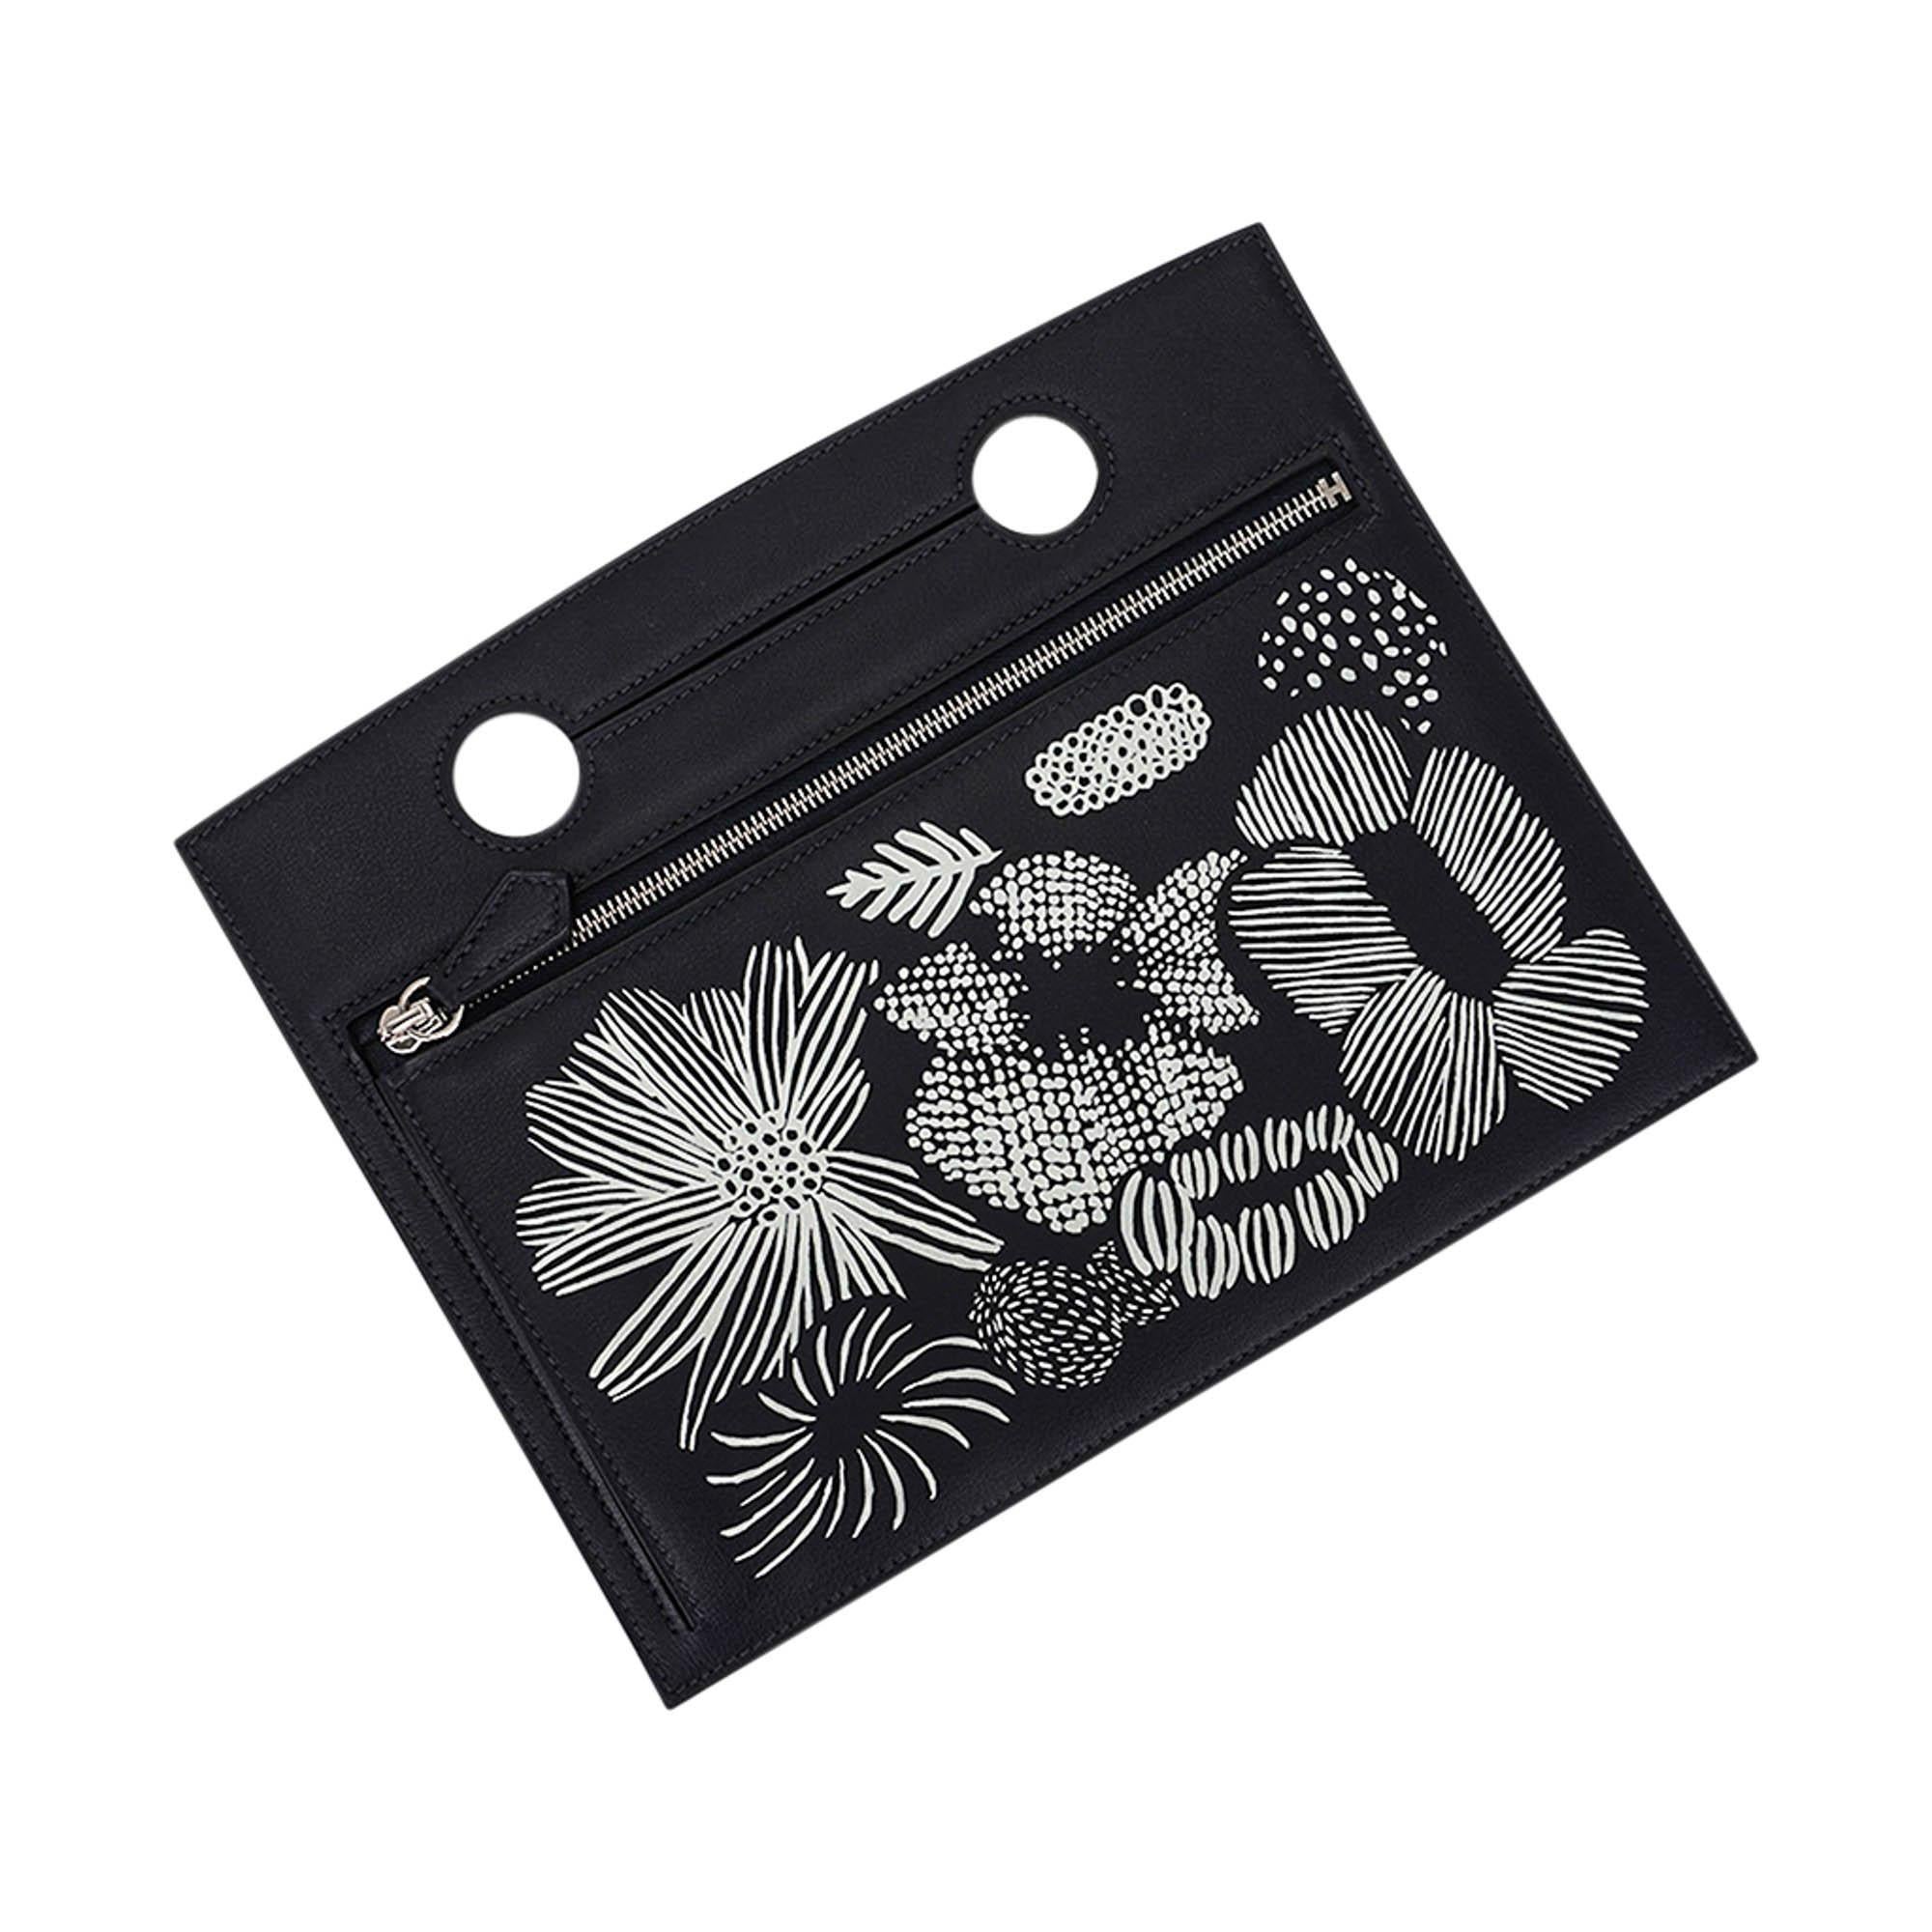 Mightychic offers an Hermes Limited Edition Backpocket 30 Pouch featured in Caban.
Beautiful Black Floral design.
Fits 30 cm Birkin bag.
Beautiful in Swift leather with Palladium hardware.
This flat Hermes Backpocket fits easily over the handle and